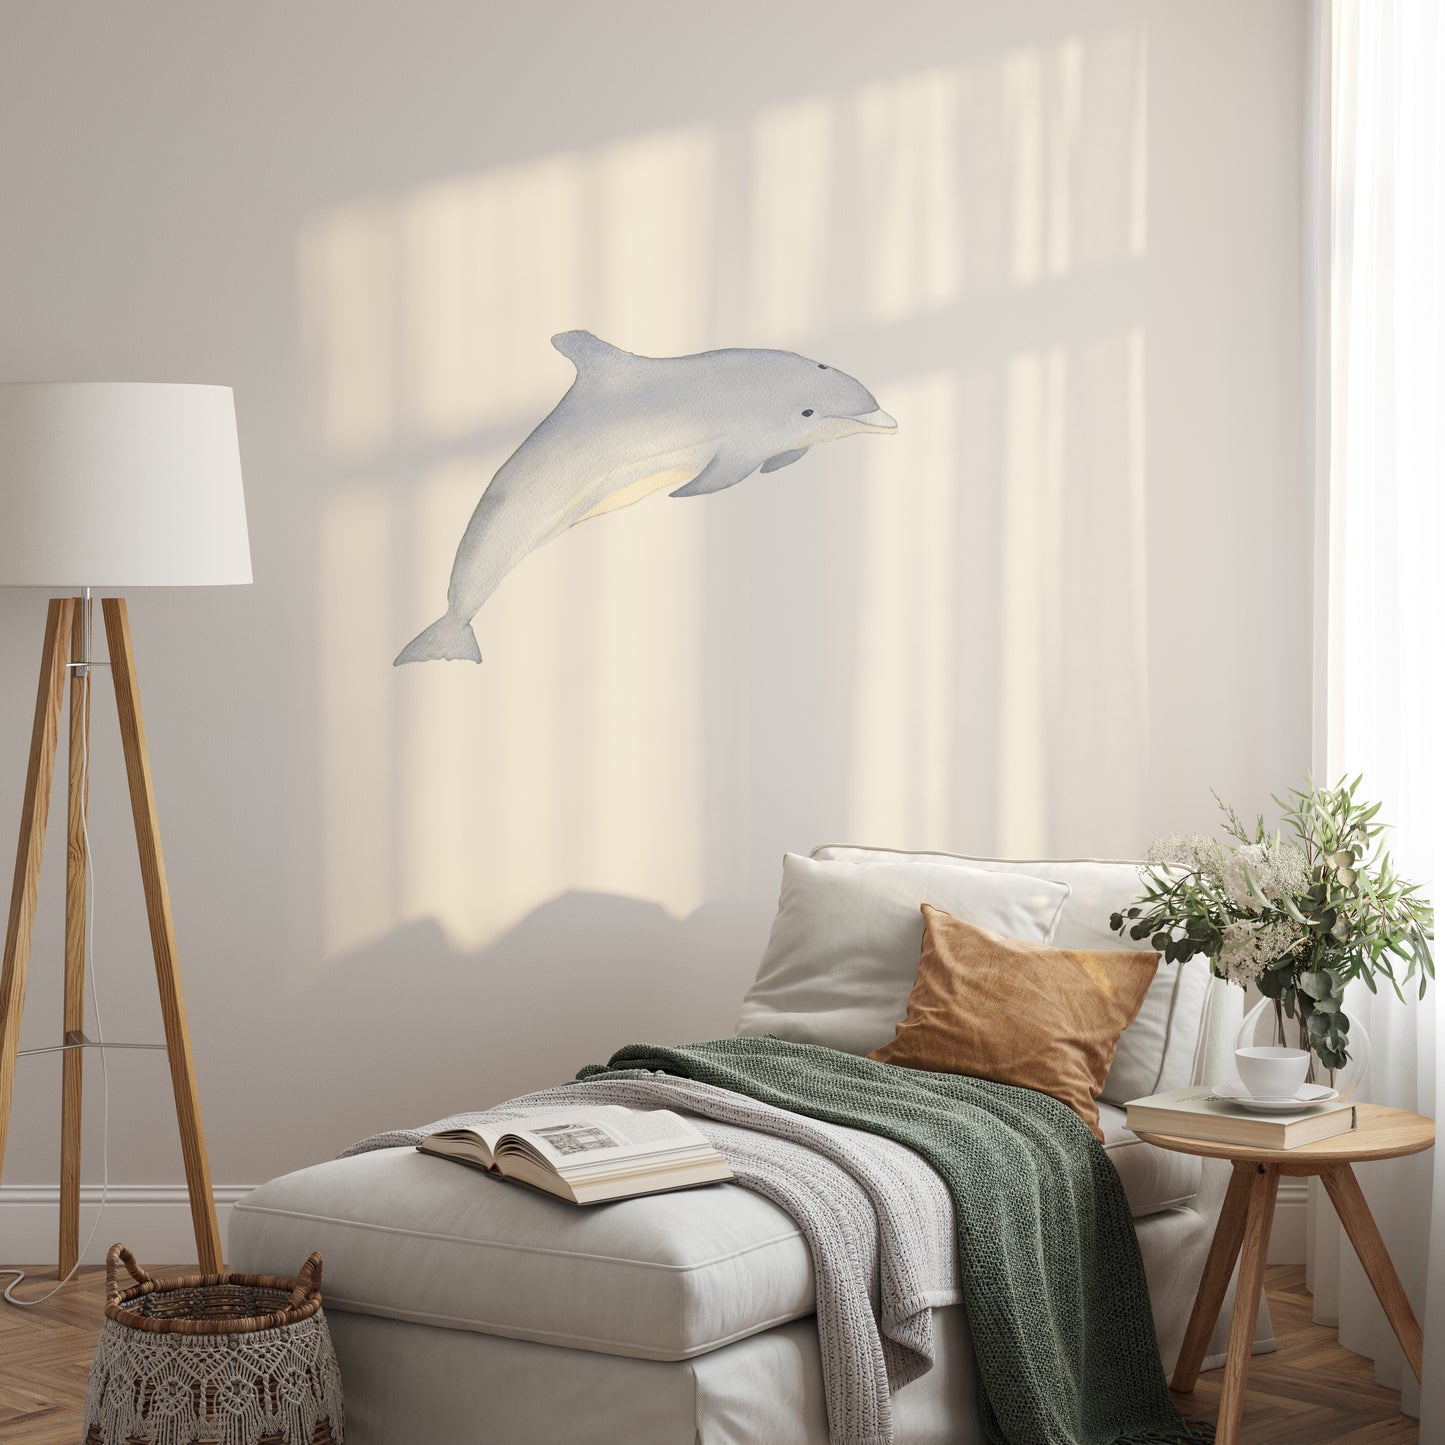 Watercolour Dolphin | Fabric wall stickers